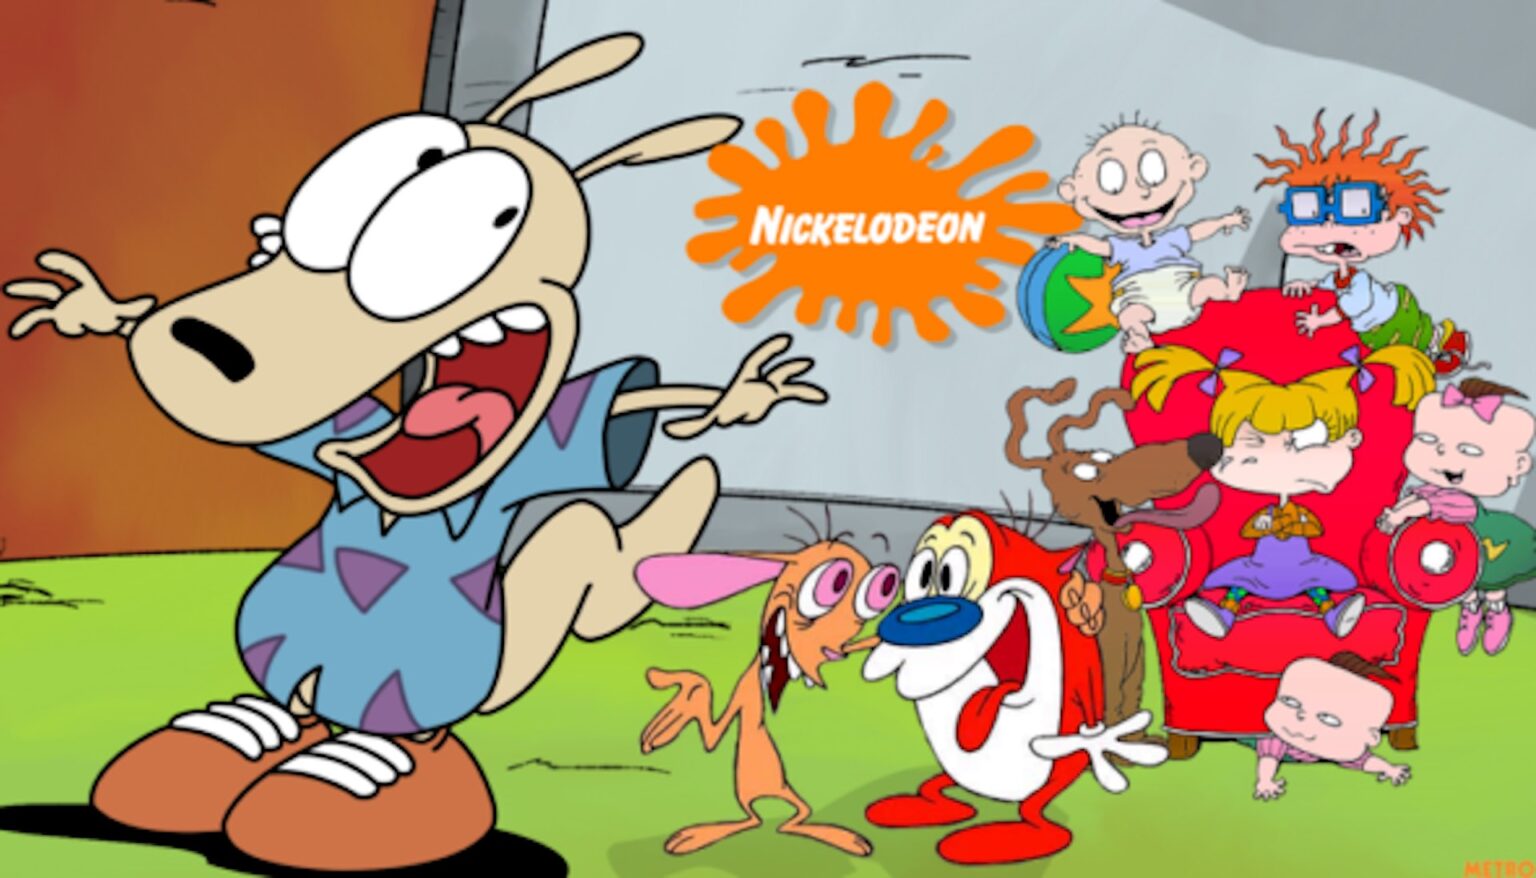 Are you feeling nostalgic? Missing those old shows and the fond memories they bring? Come look at these Nickelodeon TV shows for true 90s kids!